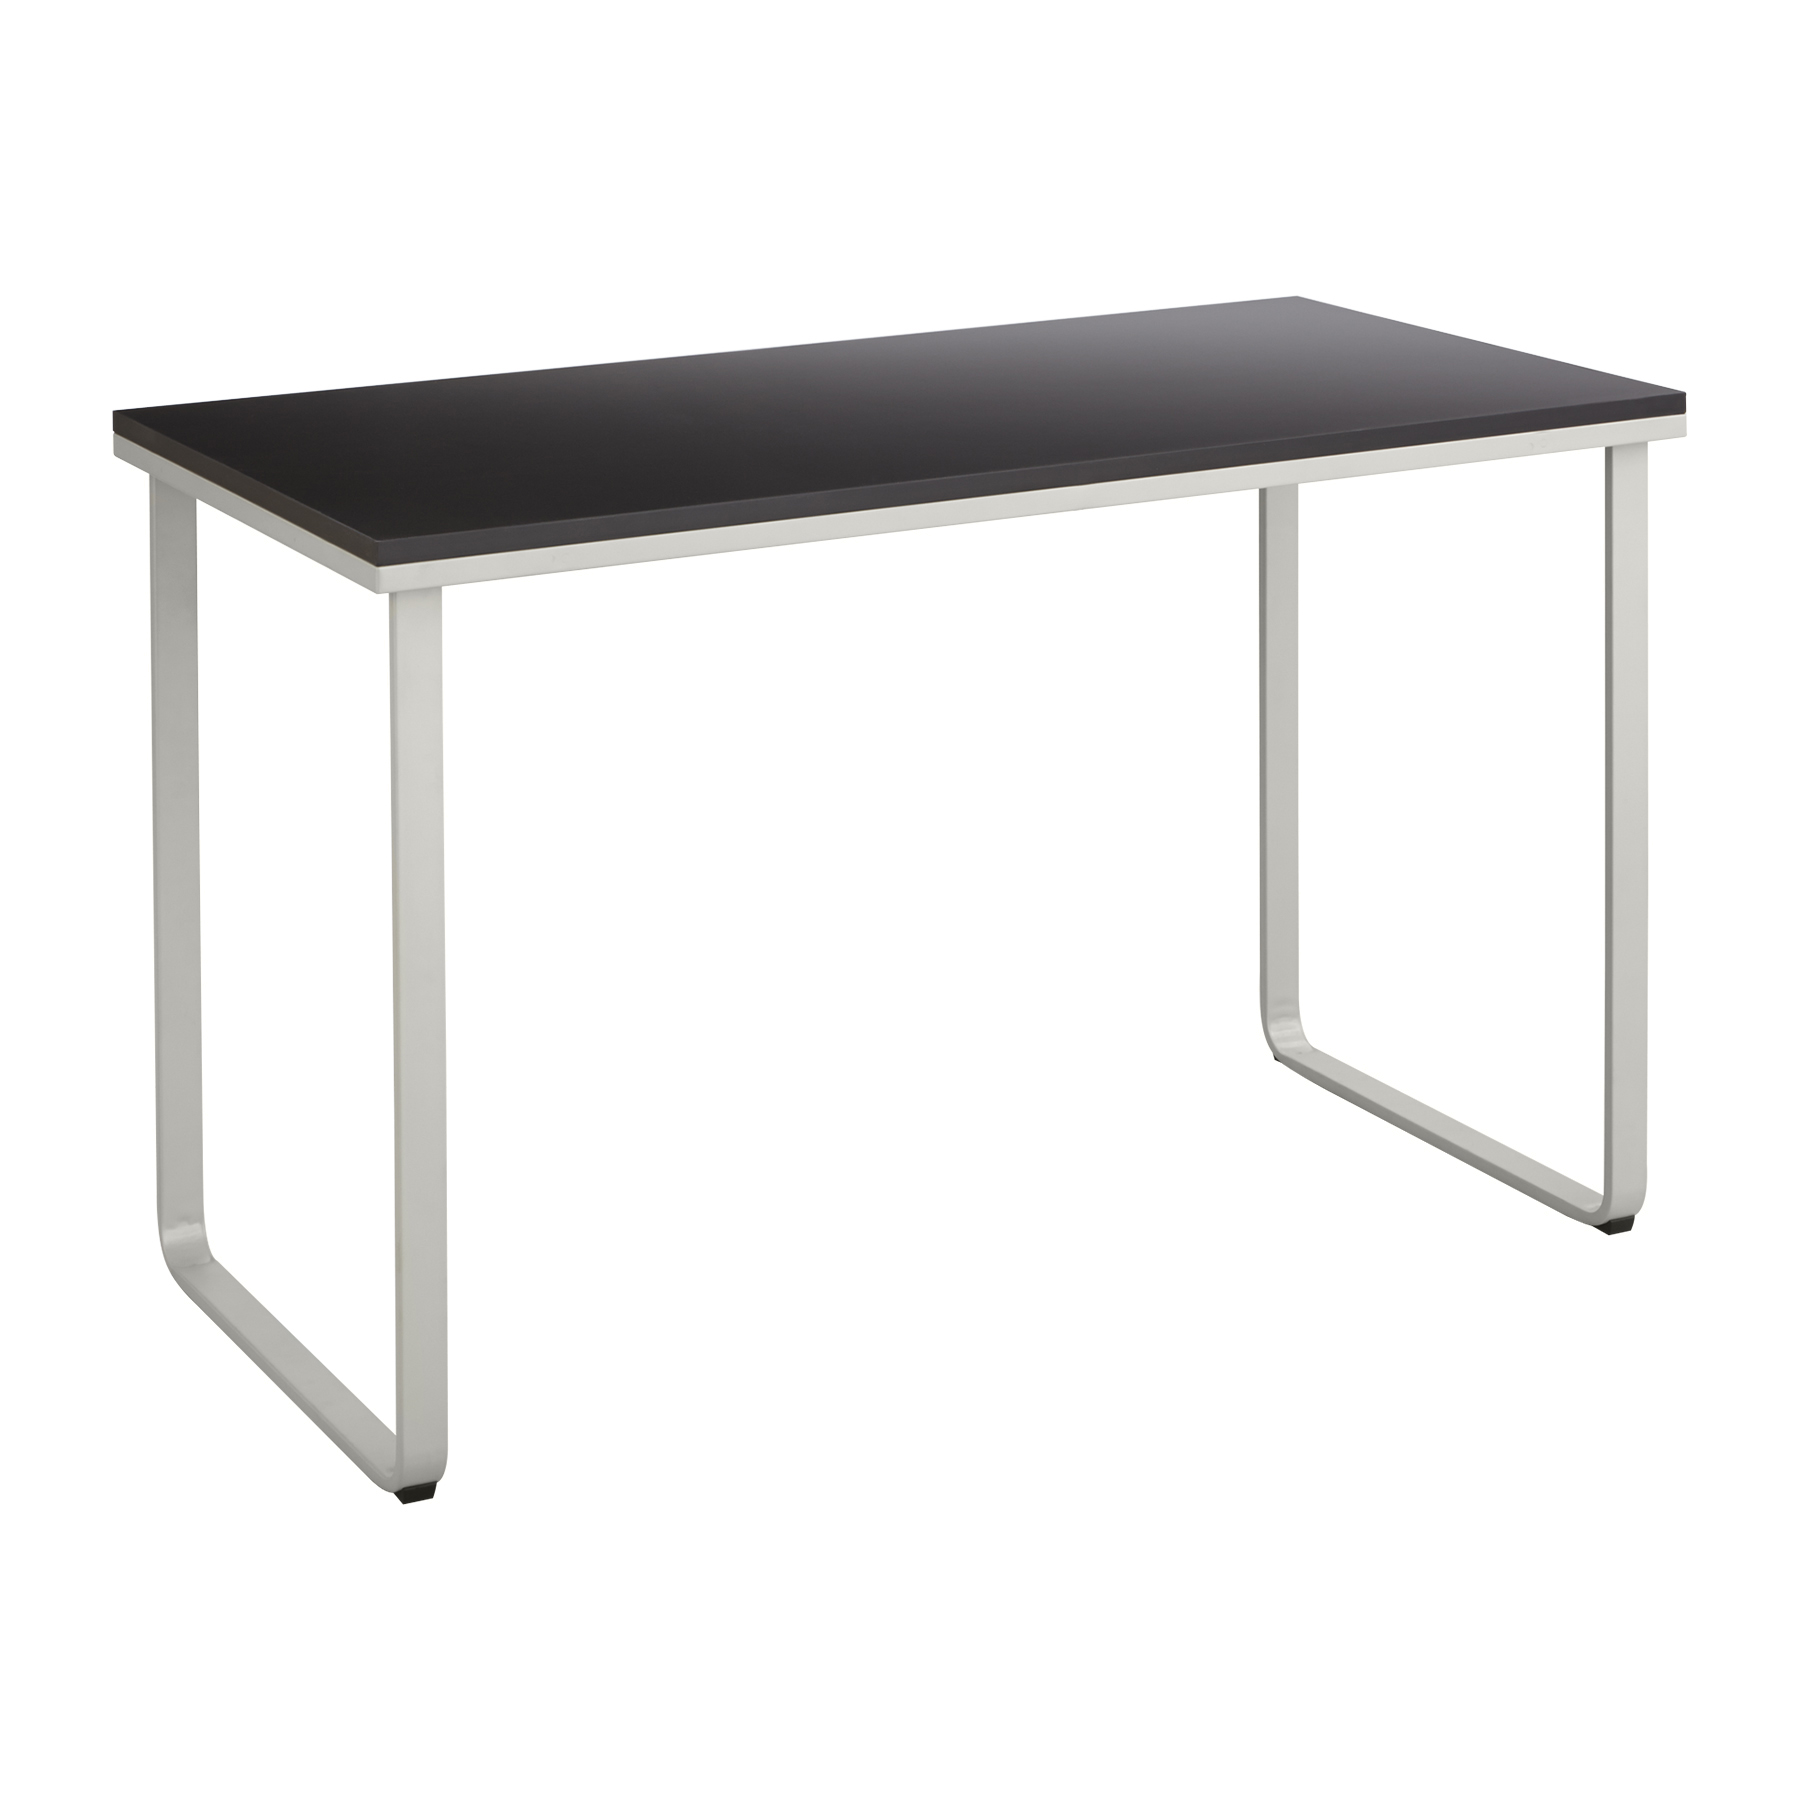 Safco® 47 Steel Table Desk, Beech/White ( 1943BHWH)